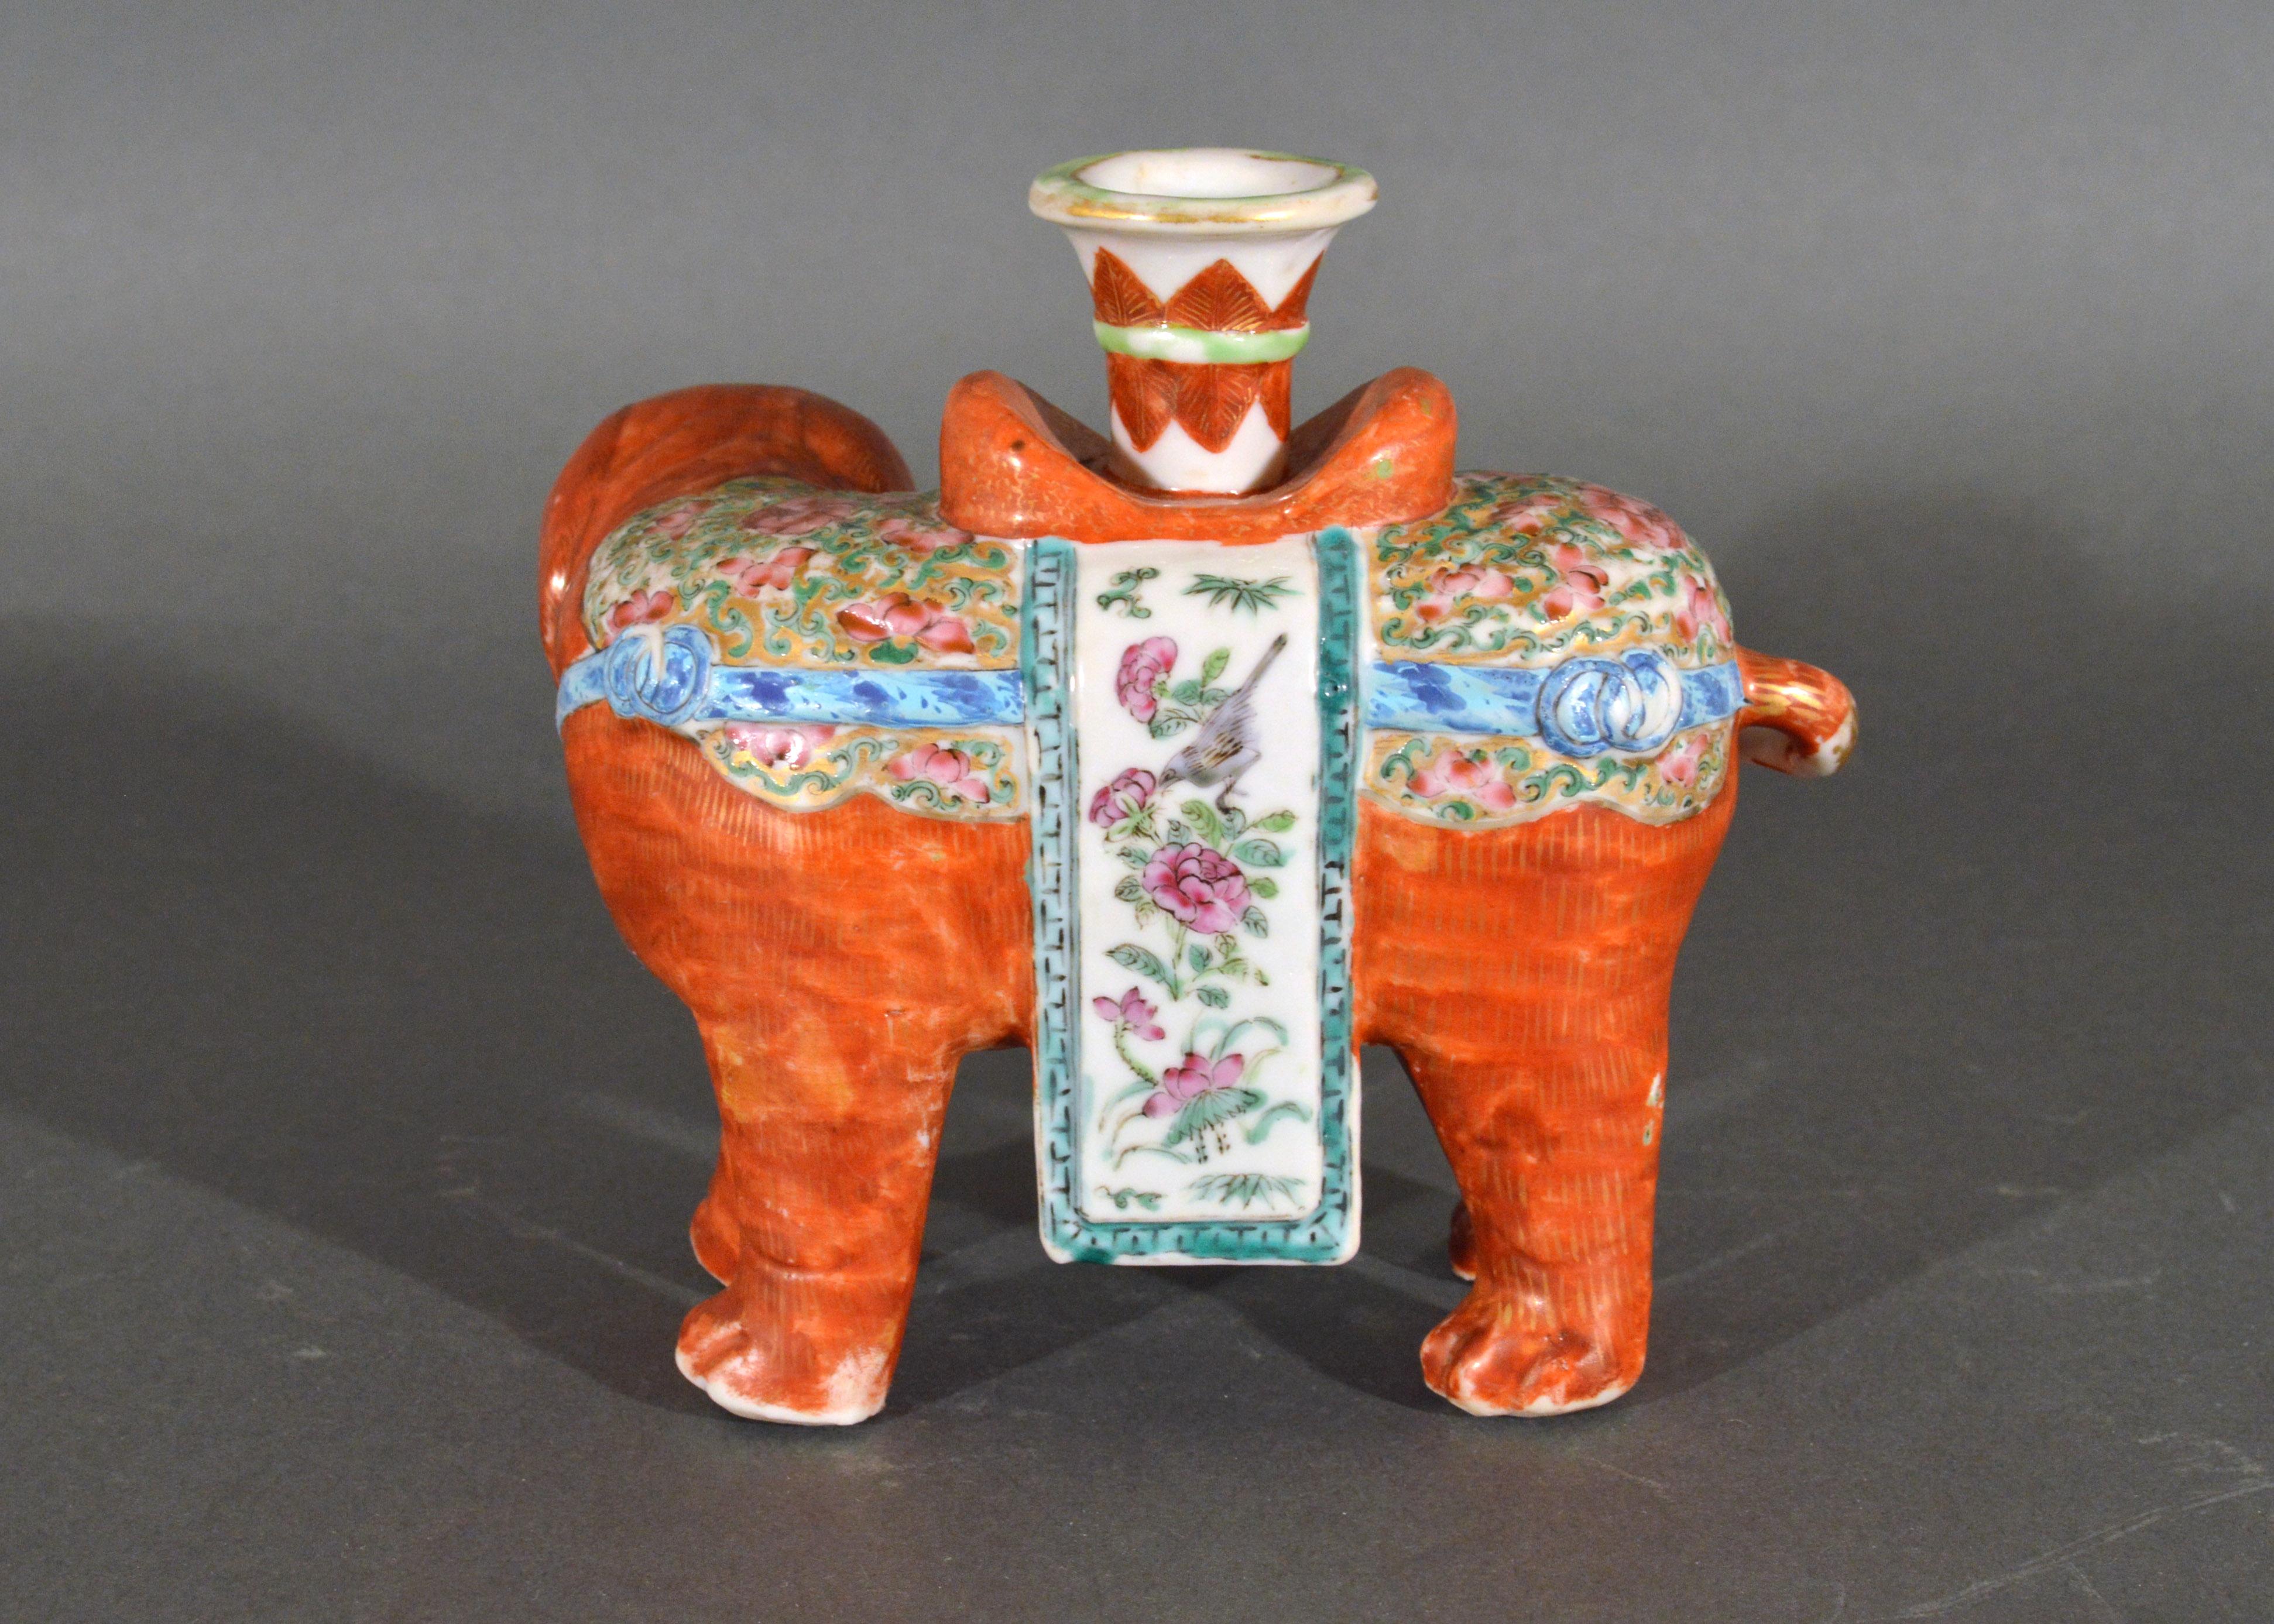 Chinese Export Porcelain Canton Famille Rose Elephant Modeled as a Candlestick For Sale 1